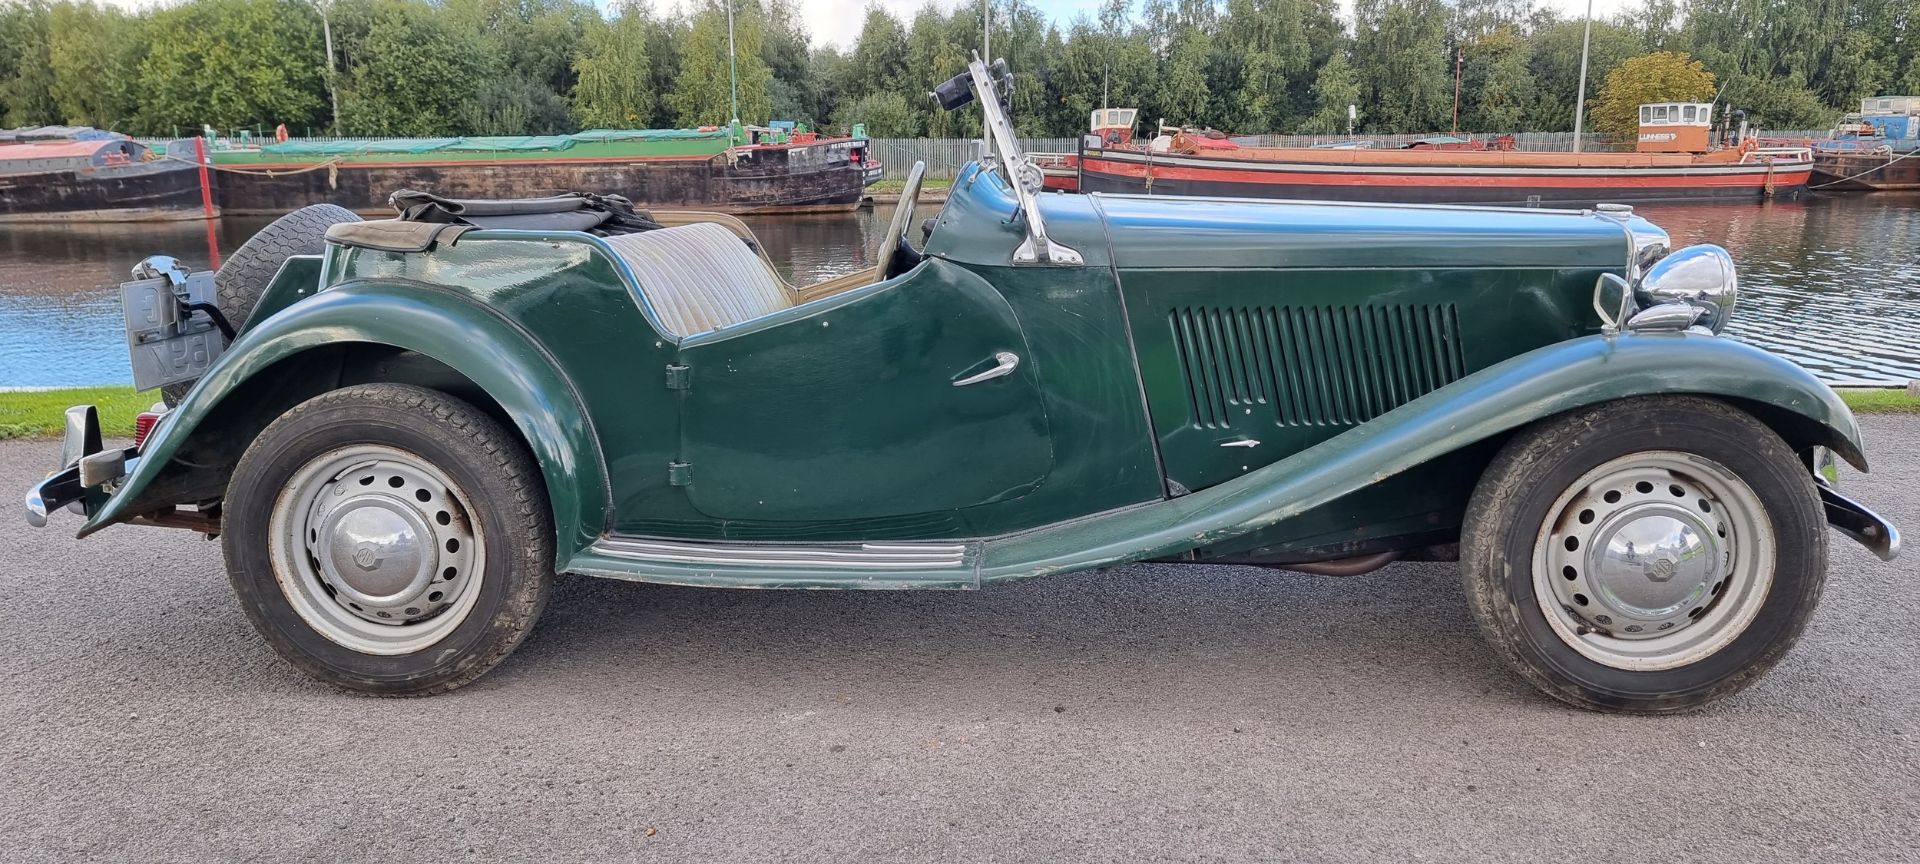 1952 MG TD, 1250cc. Registration number LTG 697. Chassis number TD 126630. Body Type 22381 Body - Image 4 of 20